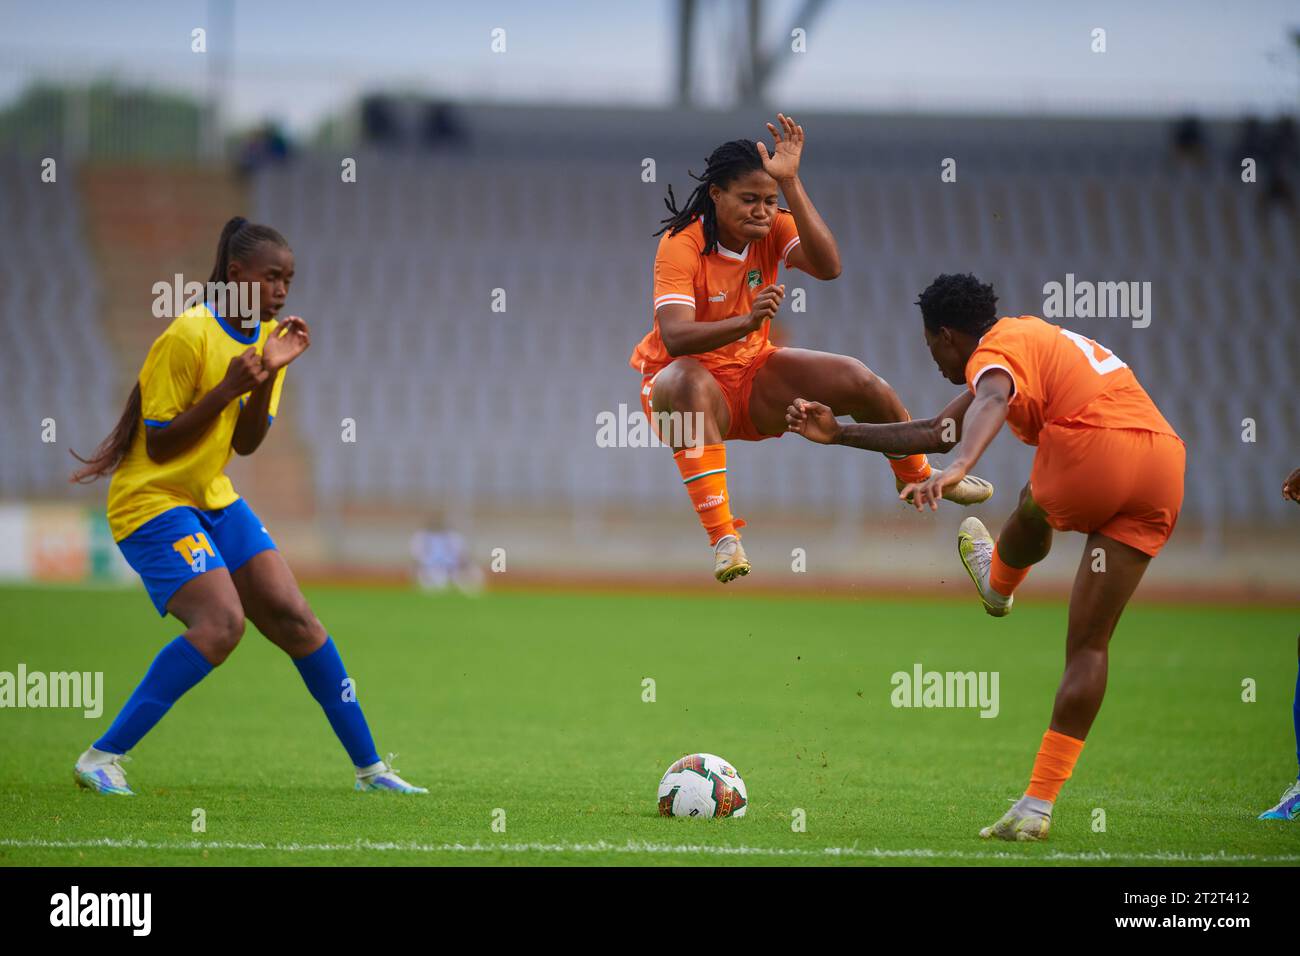 the Ivorian Kphao Zote Nina clearing the ball from her compatriot and the Tanzanian Joyce Lema protect each other Stock Photo